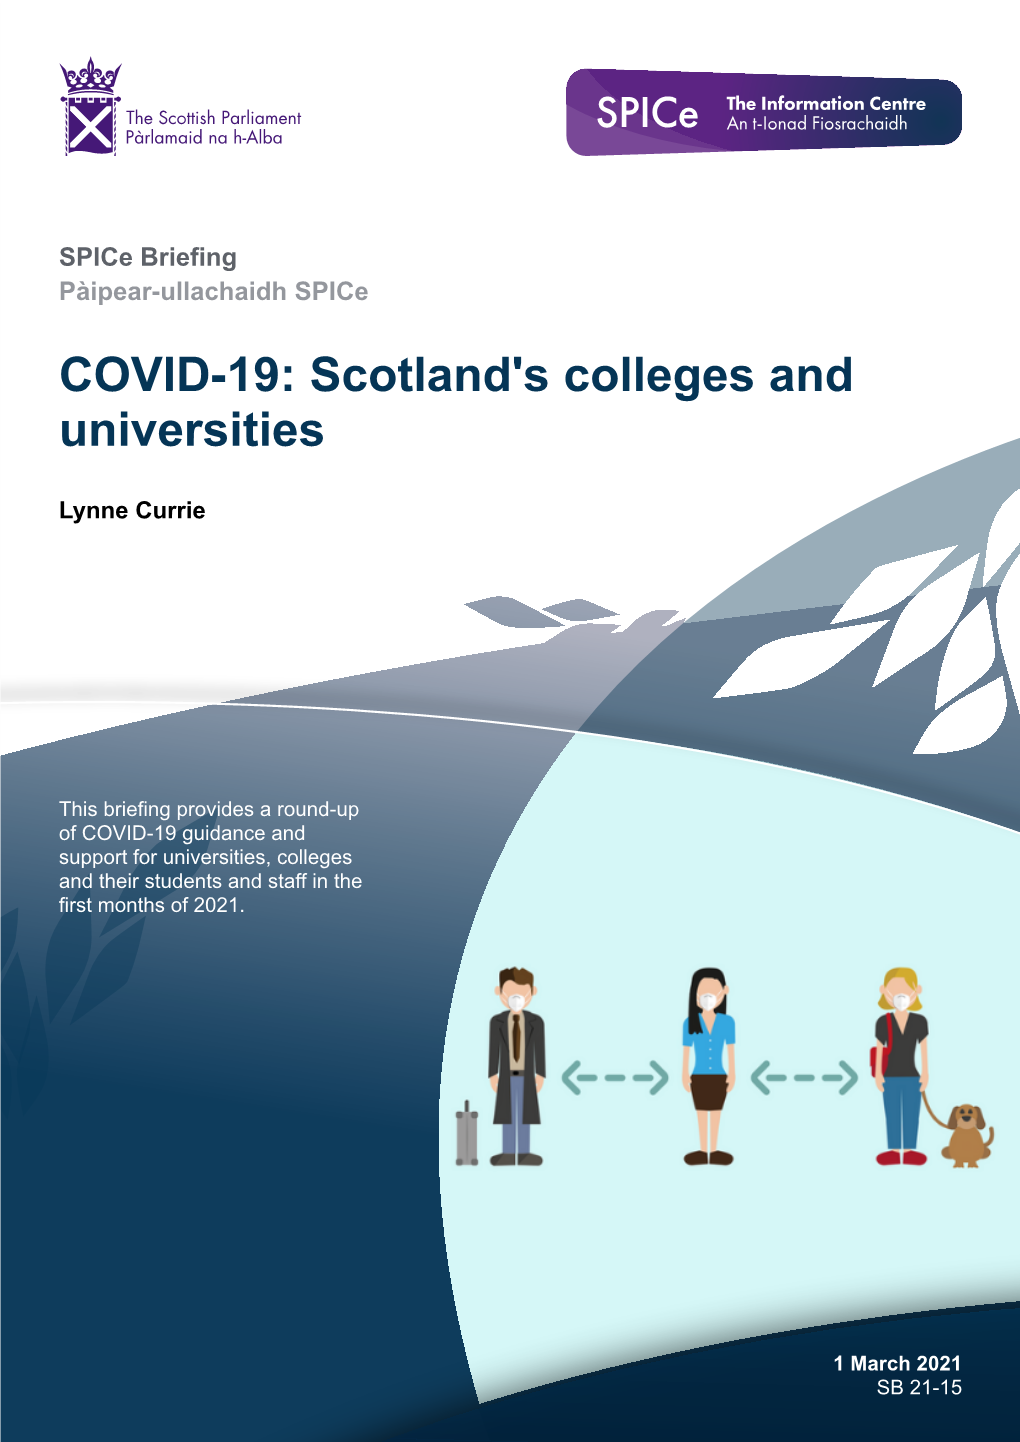 COVID-19: Scotland's Colleges and Universities